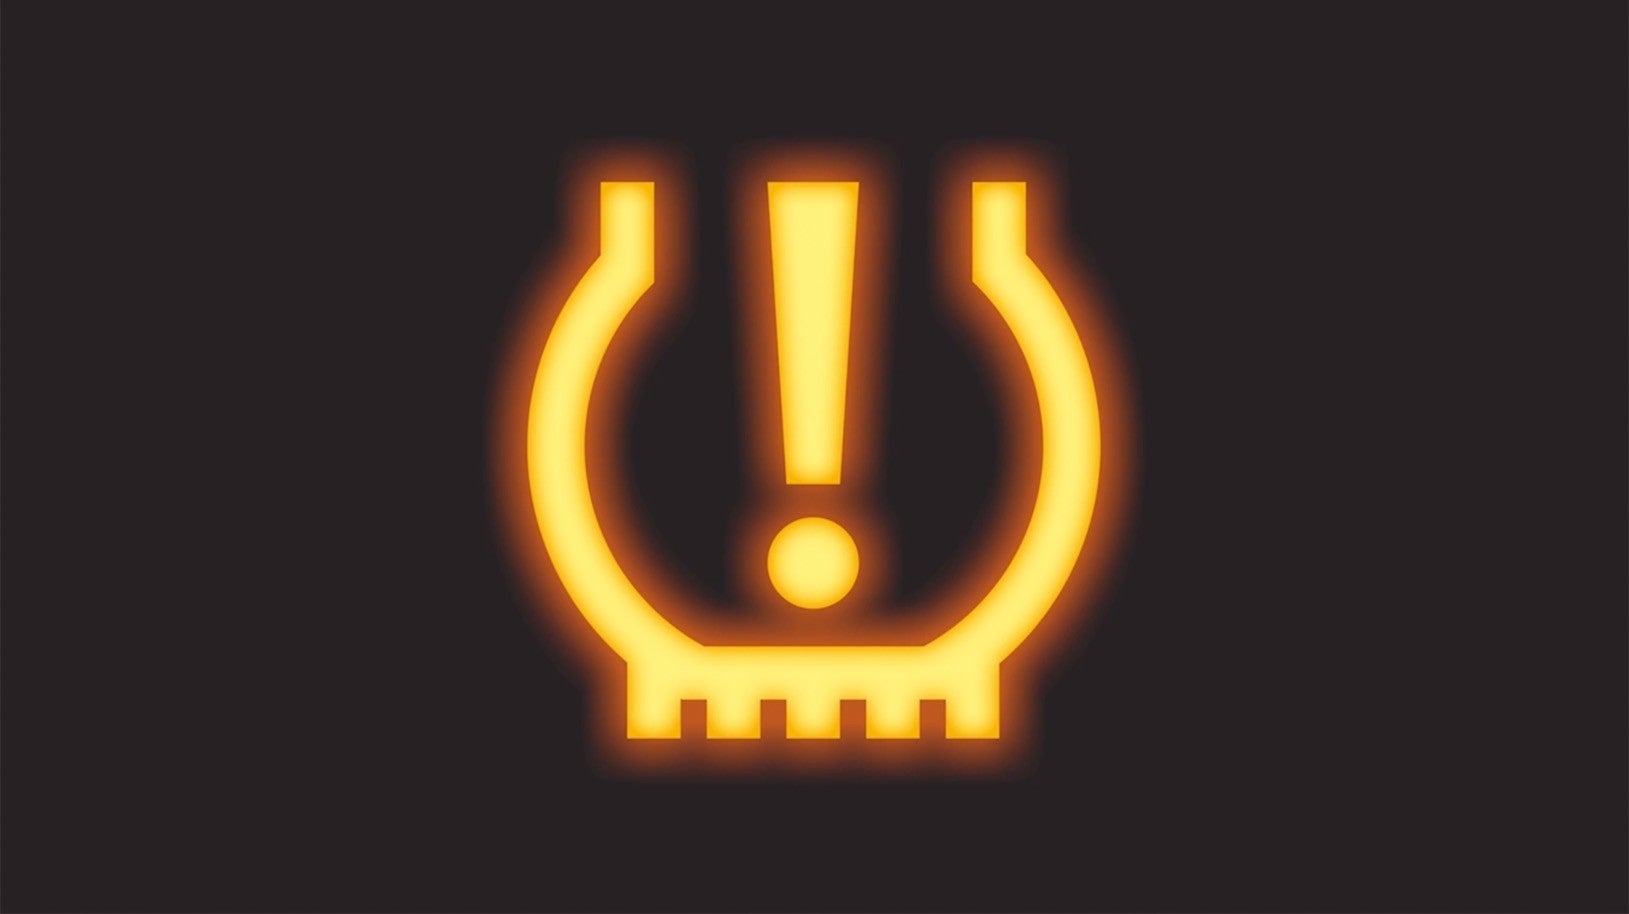  Image of the Tire Pressure Monitoring System Light | Burke Subaru in Cape May Court House NJ